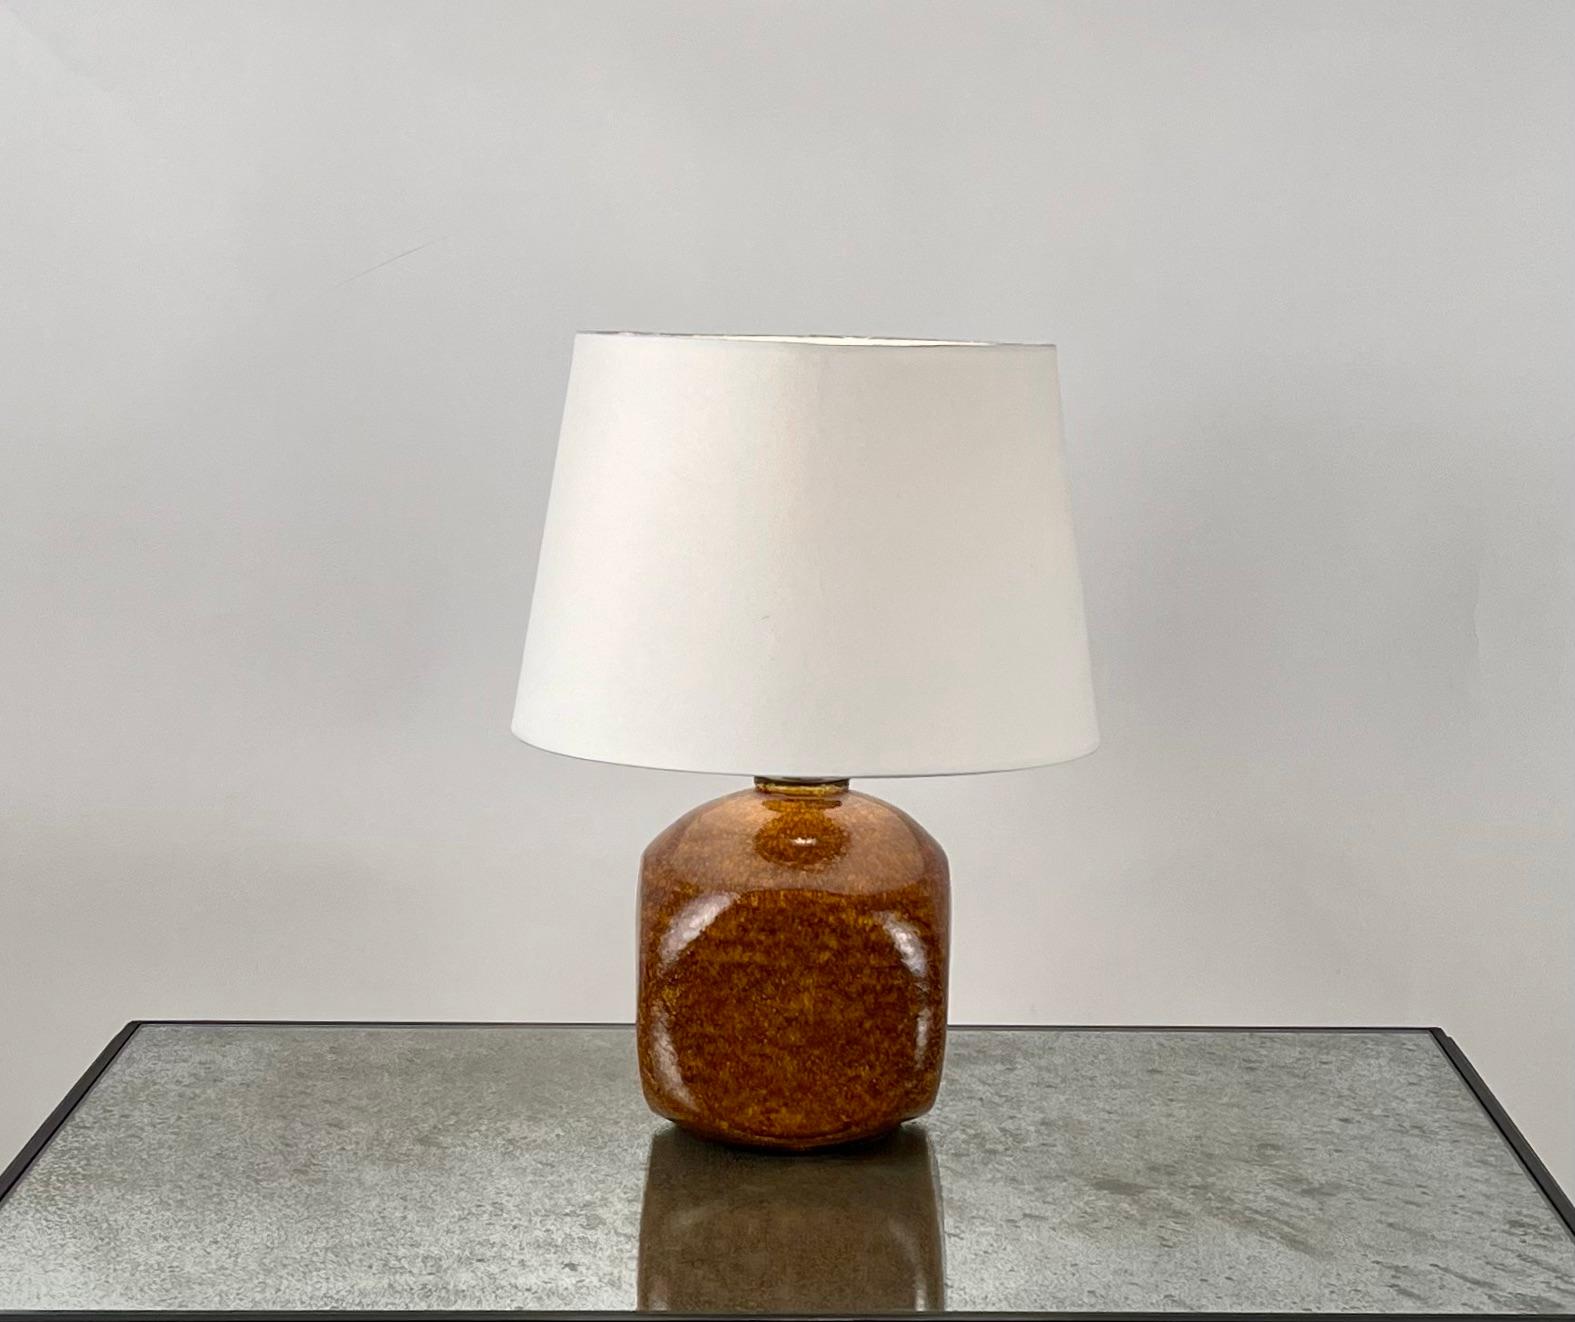 Chic Glazed Ceramic Desk Lamp by Accolay Pottery, France. 

Includes European style parchment shade (no harp or finial). 

Rewired with high-end twist cord and 3-way switch (on, half intensity, off). A 40w filament bulb is included in your order. 